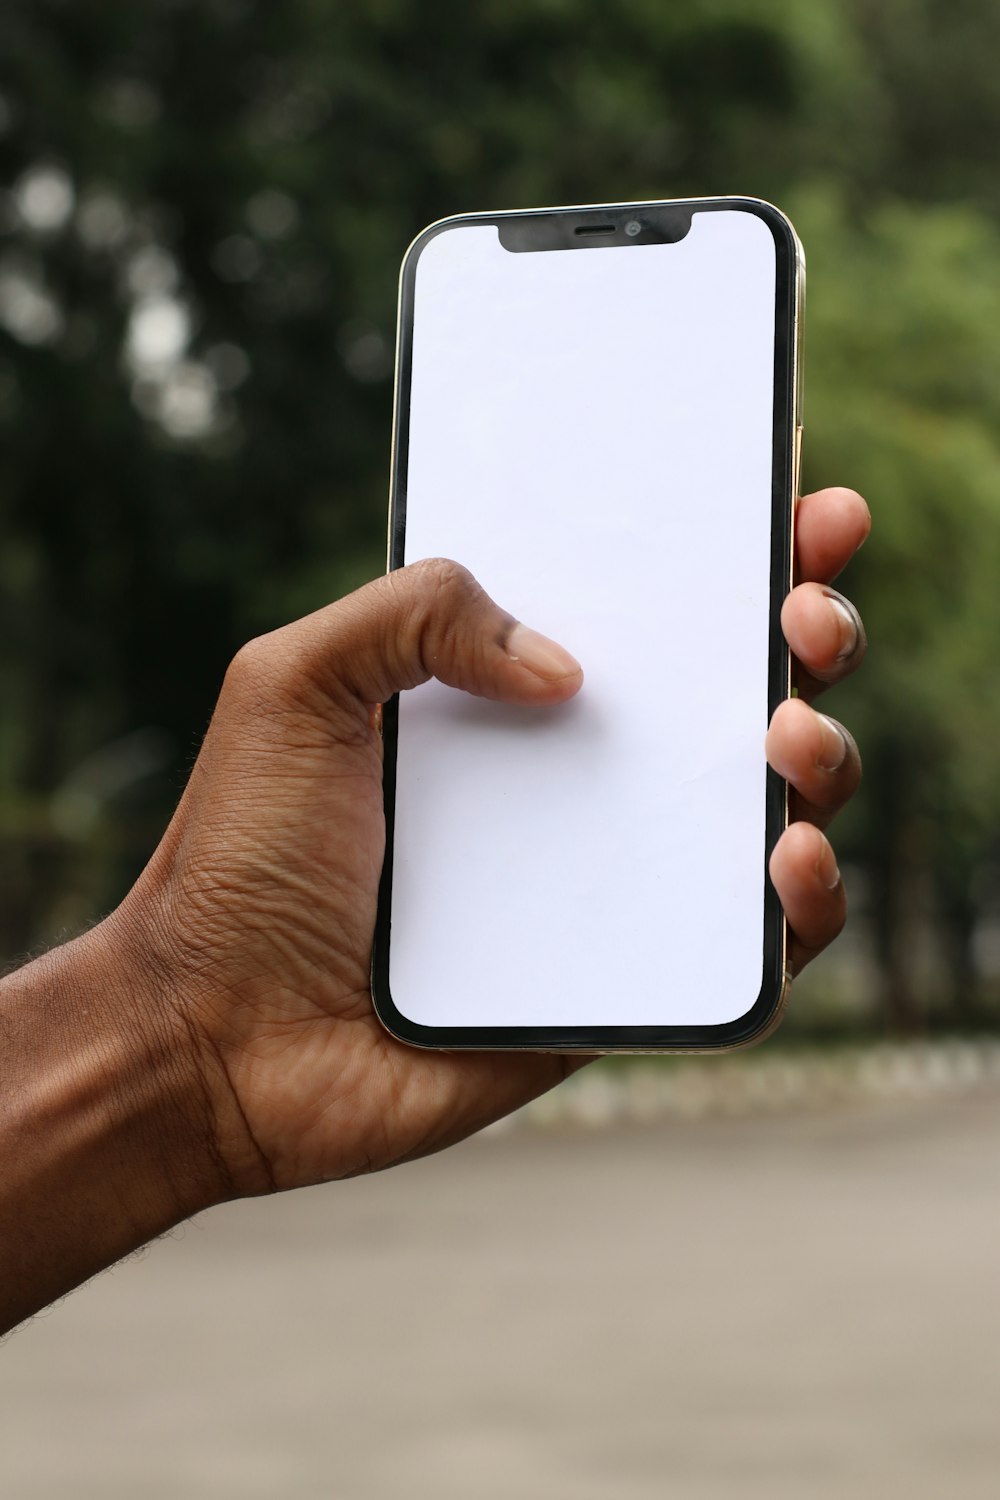 Holding Iphone Pictures | Download Free Images on Unsplash